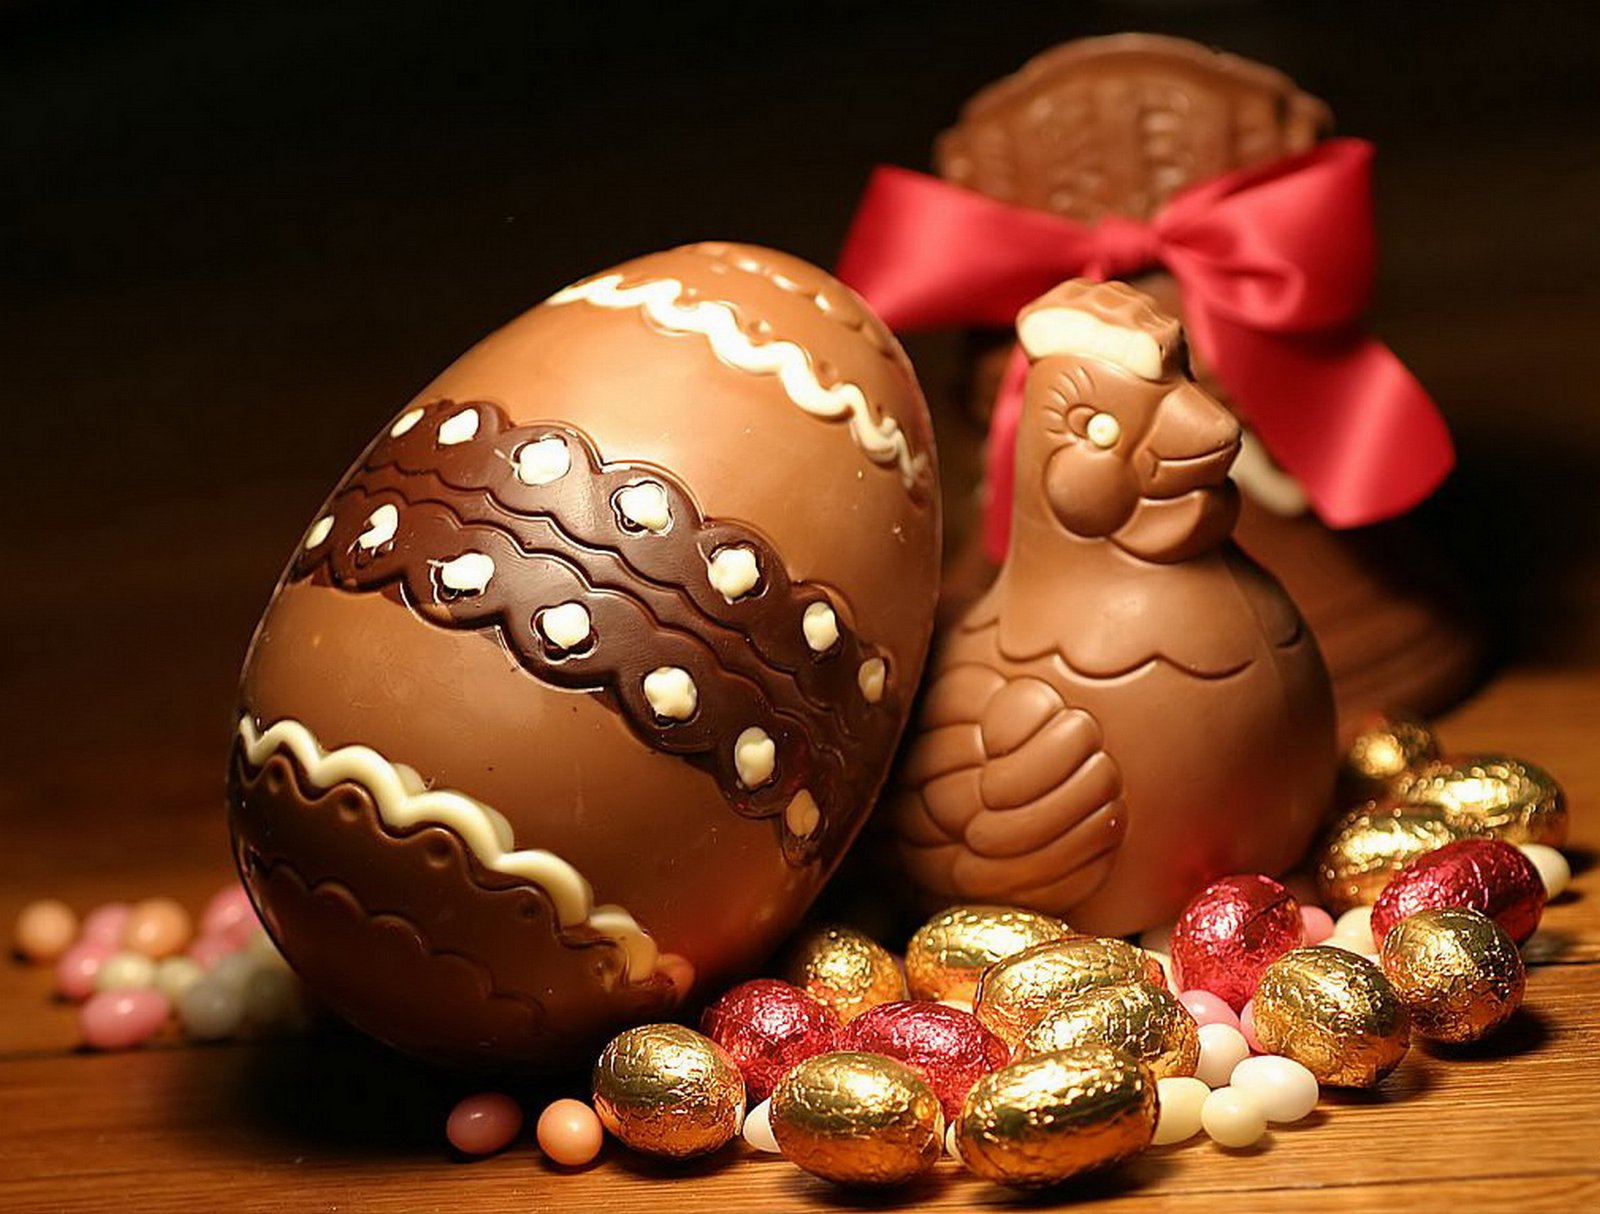 This Easter Head Over To Dezertfox To Devour Some Delish Easter Eggs And Bunnies